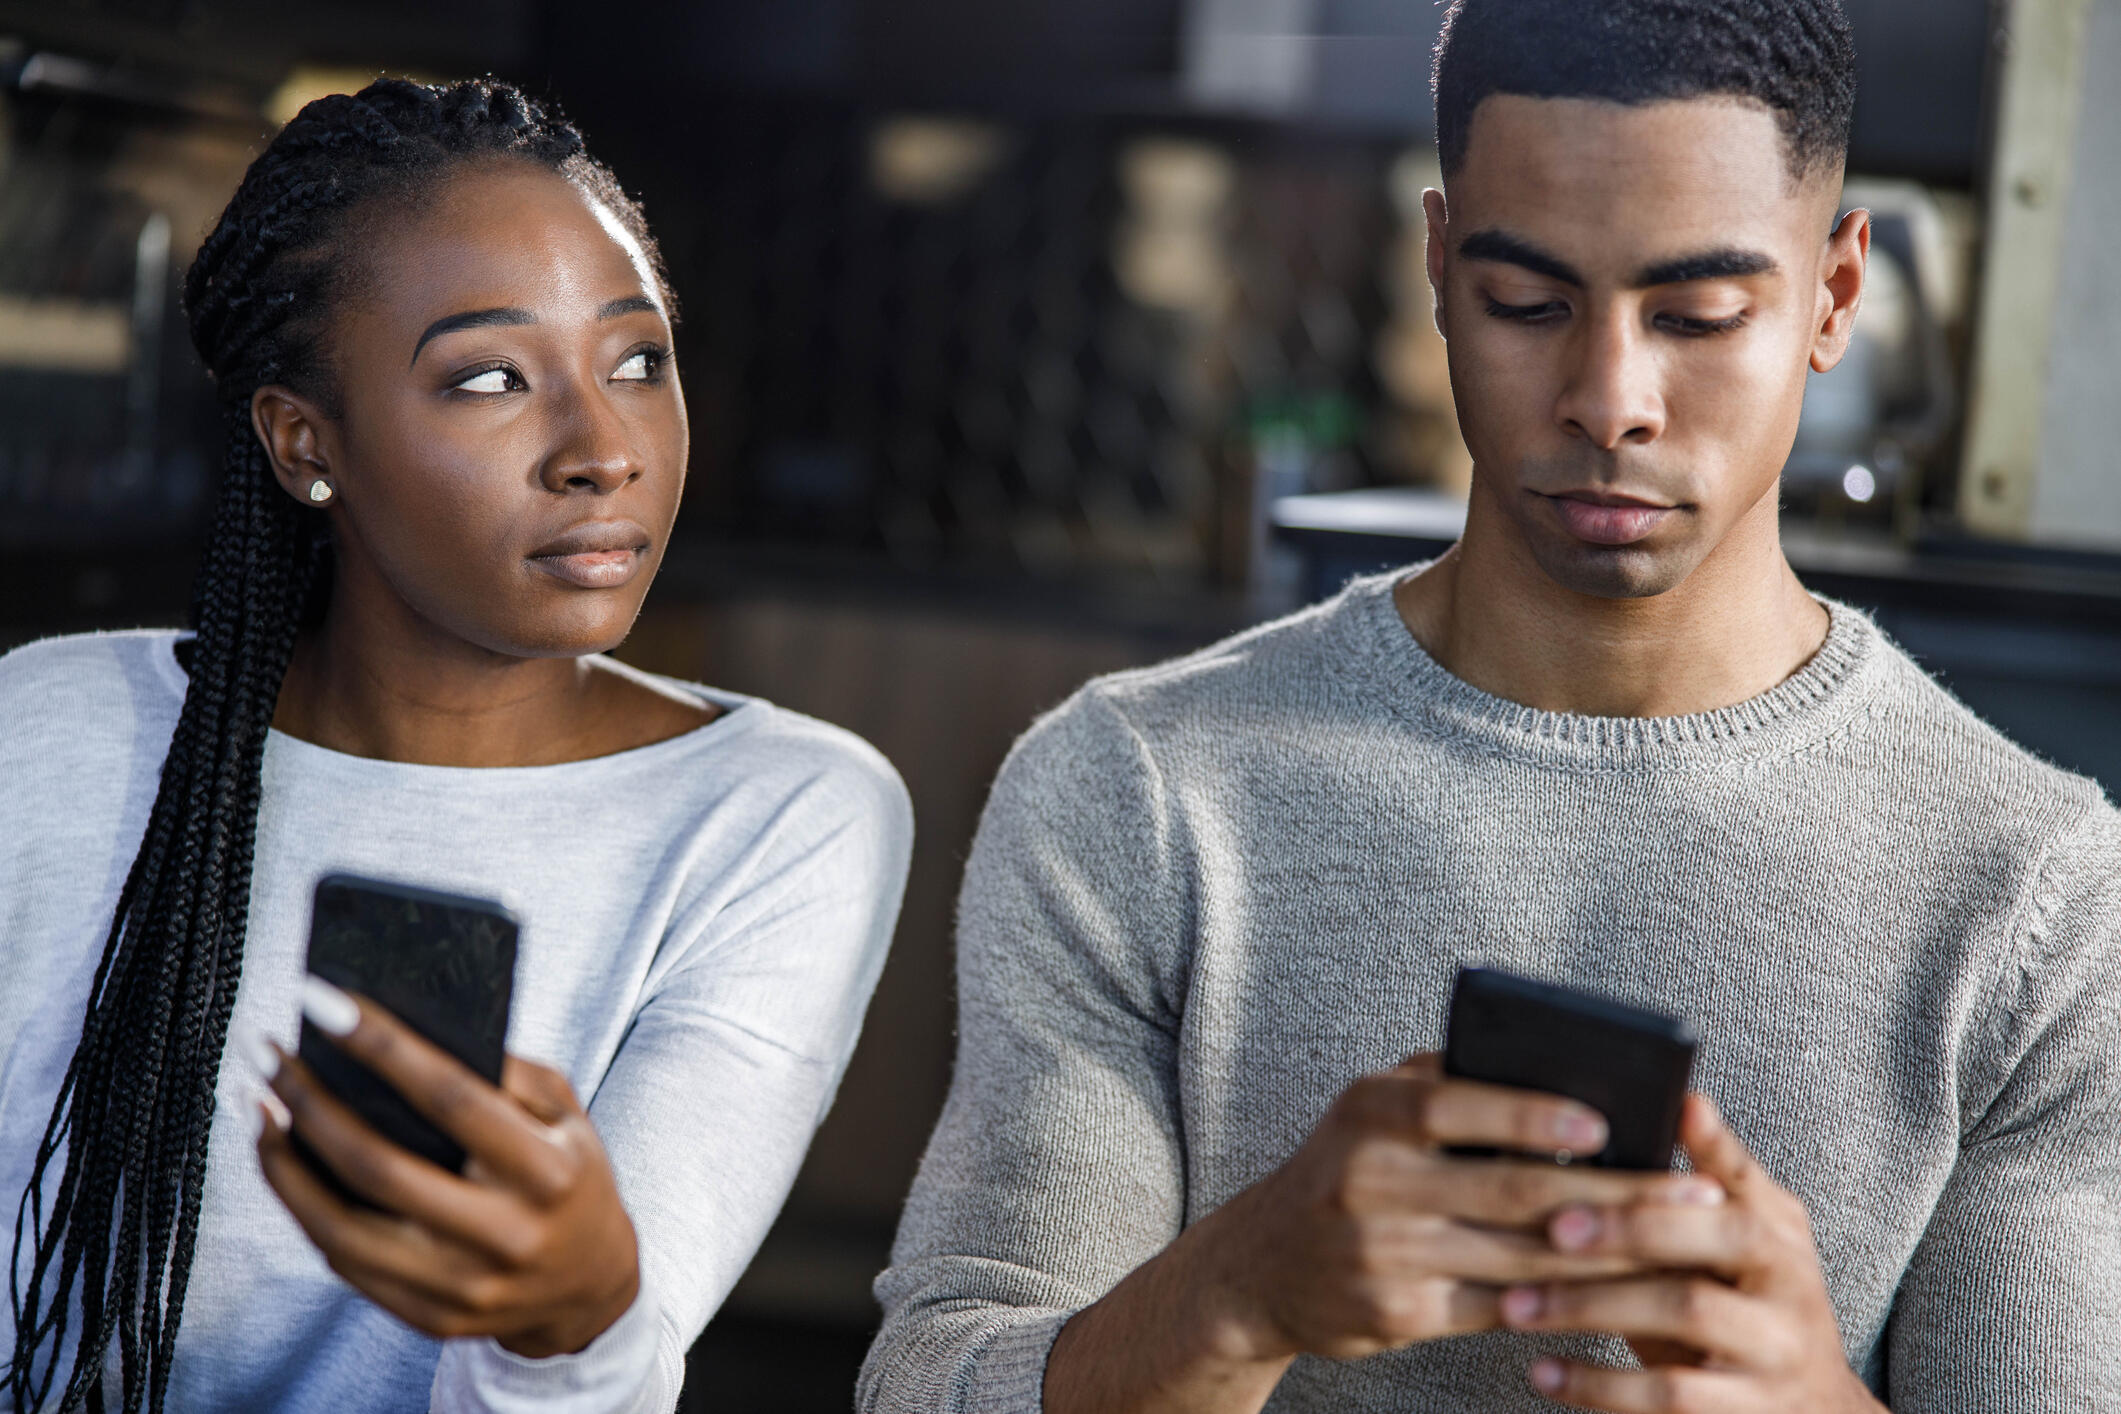 A photo of a man and woman sitting next to each other. Both people are holding cell phones, but the woman is looking at the man to her right supsicously while the man is looking at his phone. 